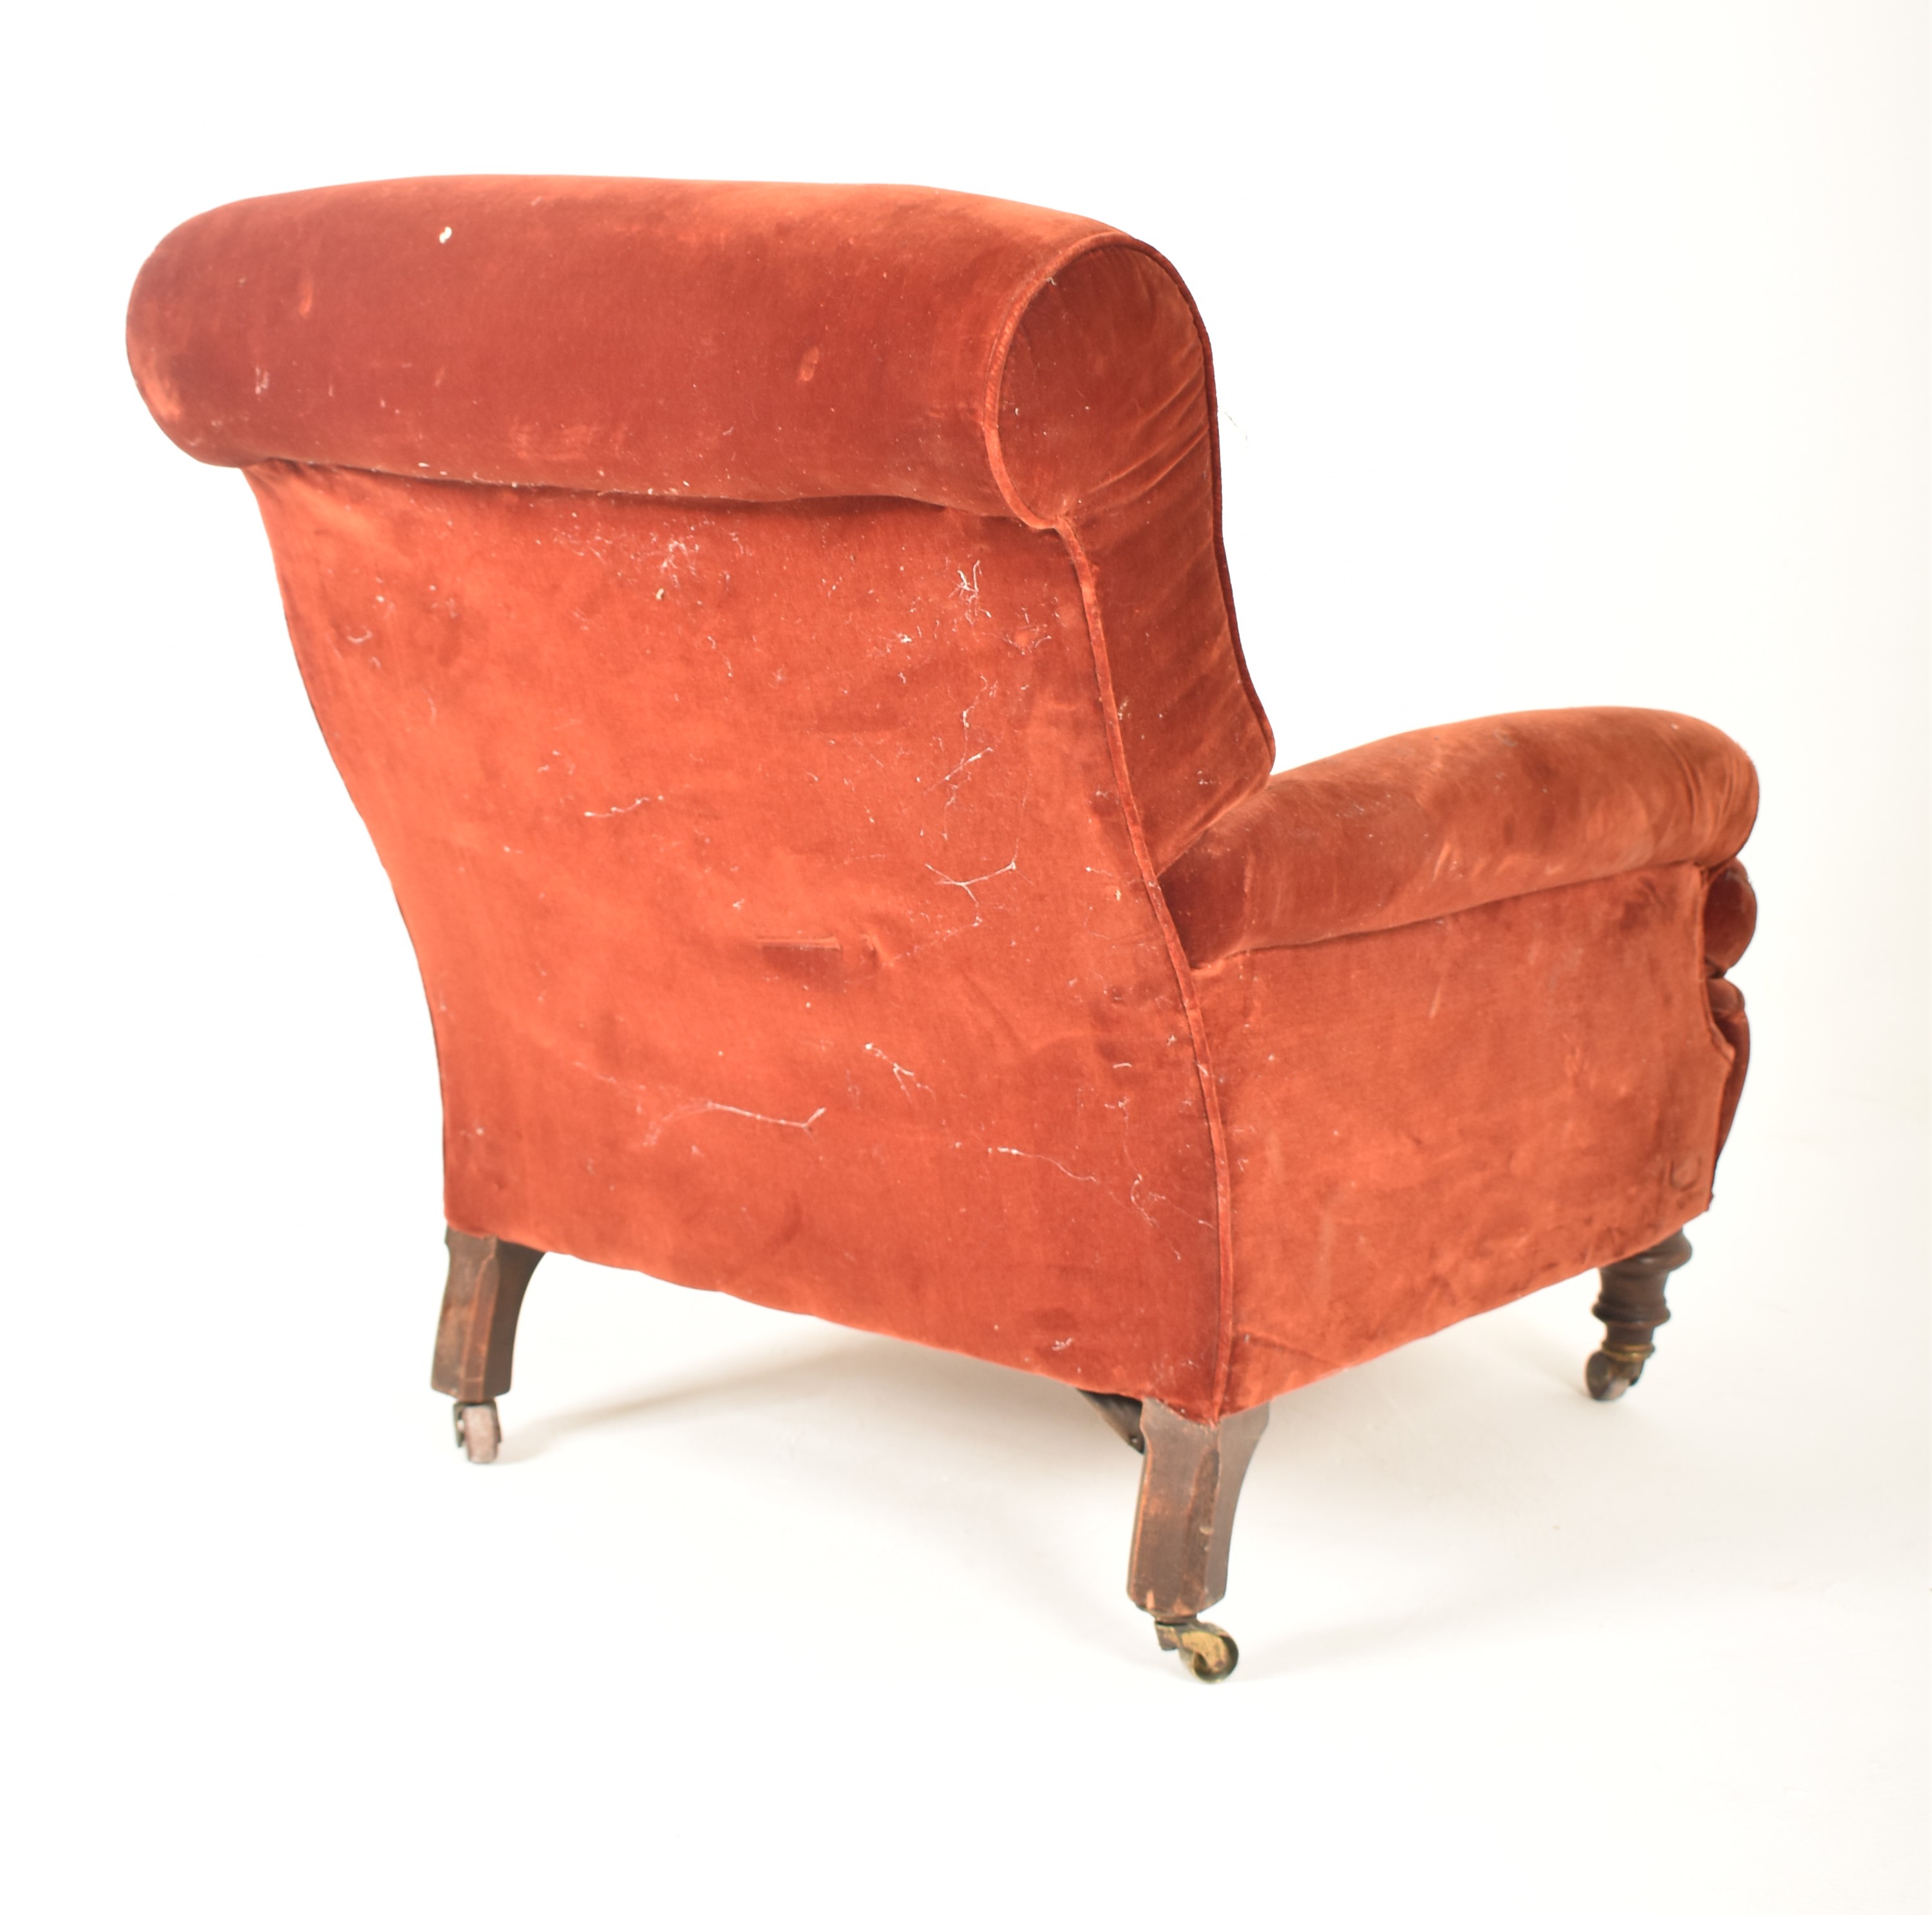 VICTORIAN UPHOLSTERED ARMCHAIR MANNER OF HOWARD & SONS - Image 6 of 6